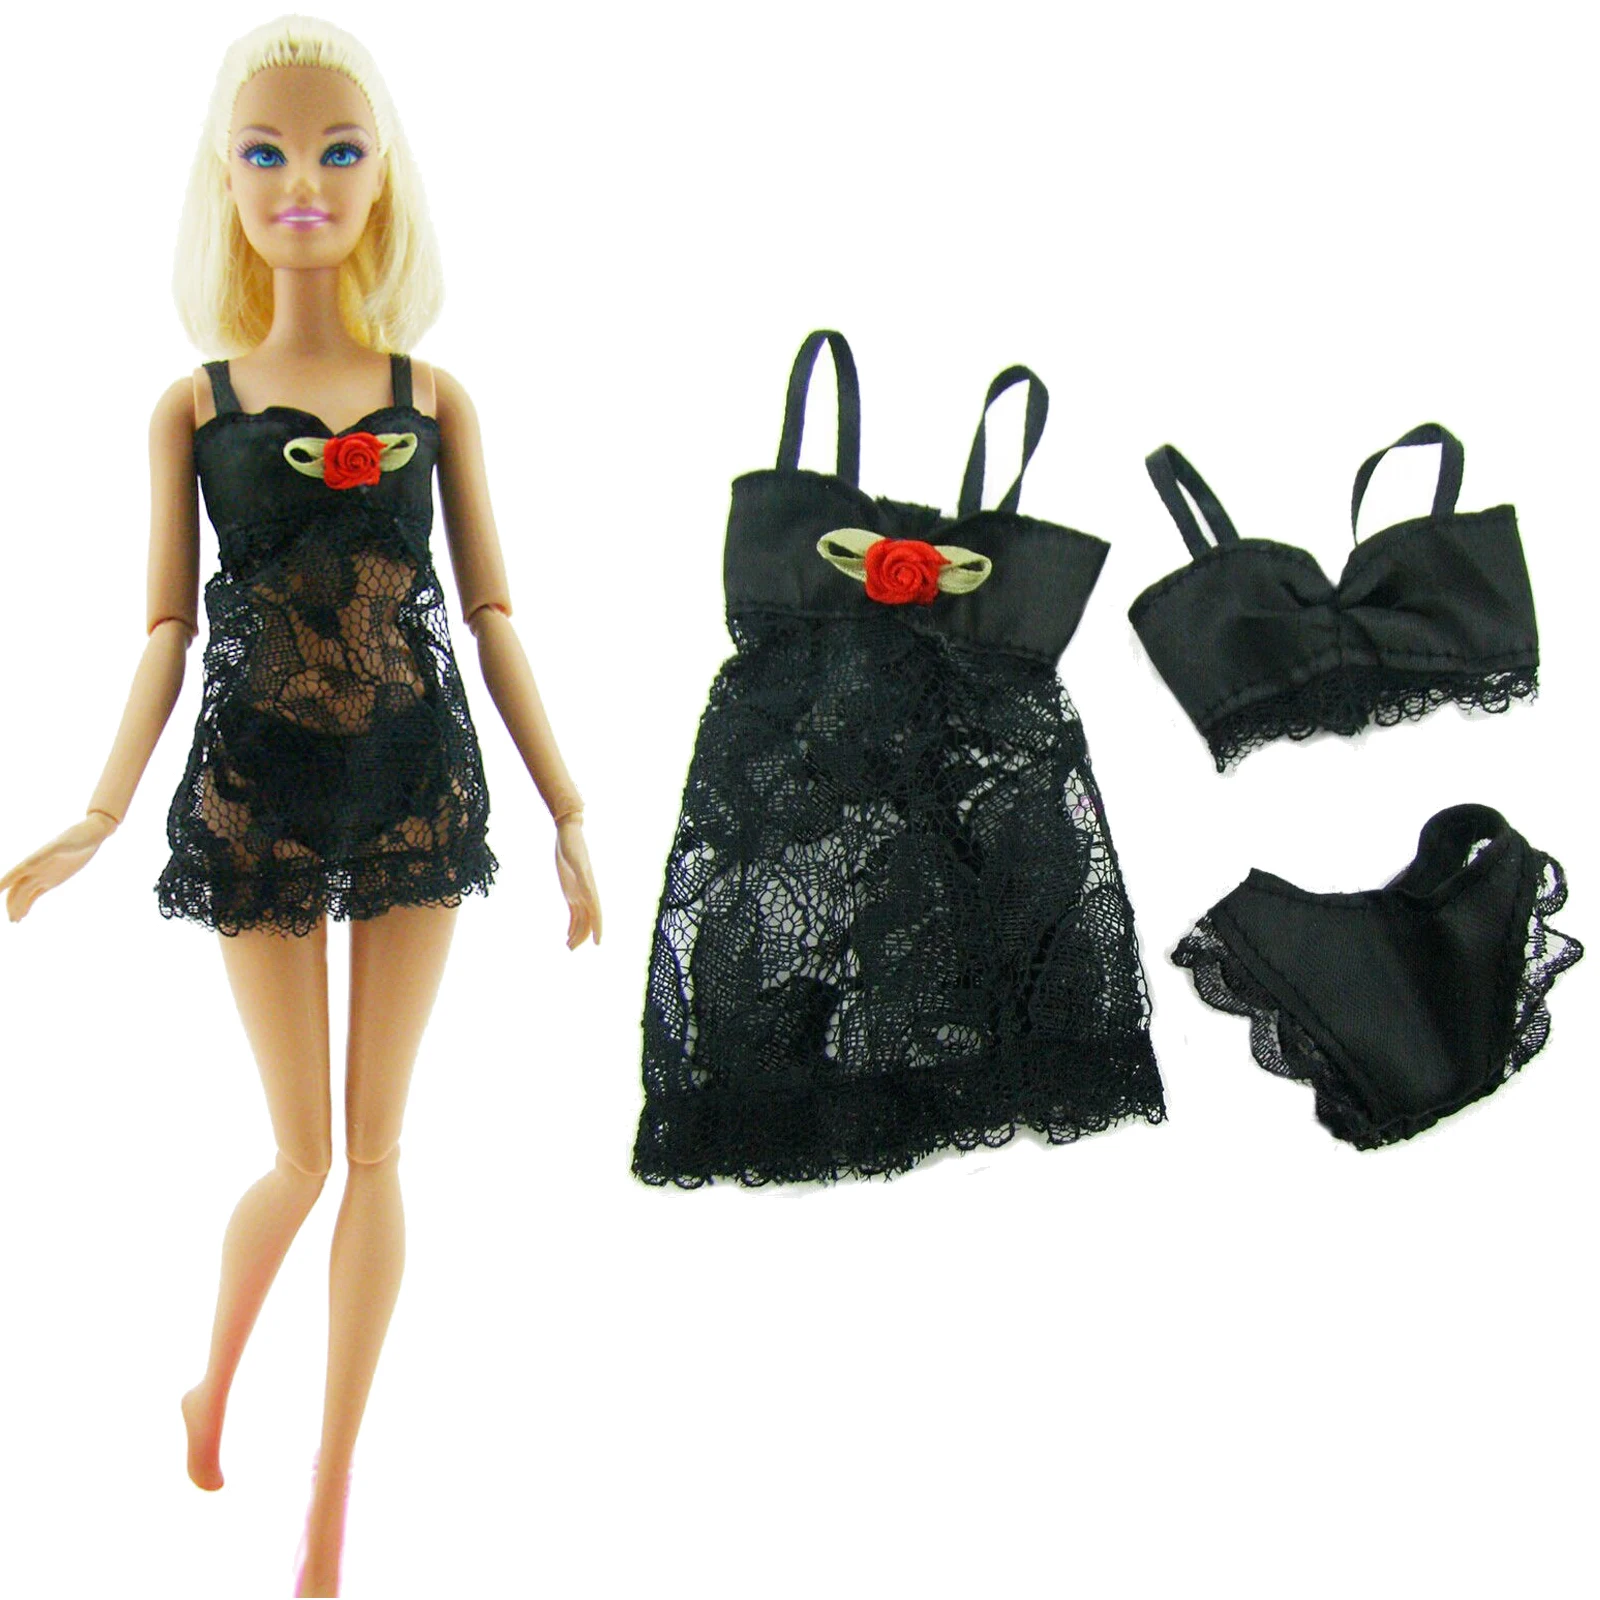 3 Pcs =1 Set Sexy Pajamas Lingerie Lace Costumes+ Bra+ Underwear Dress Clothes for Barbie Doll Clothes Accessories Girl Toy